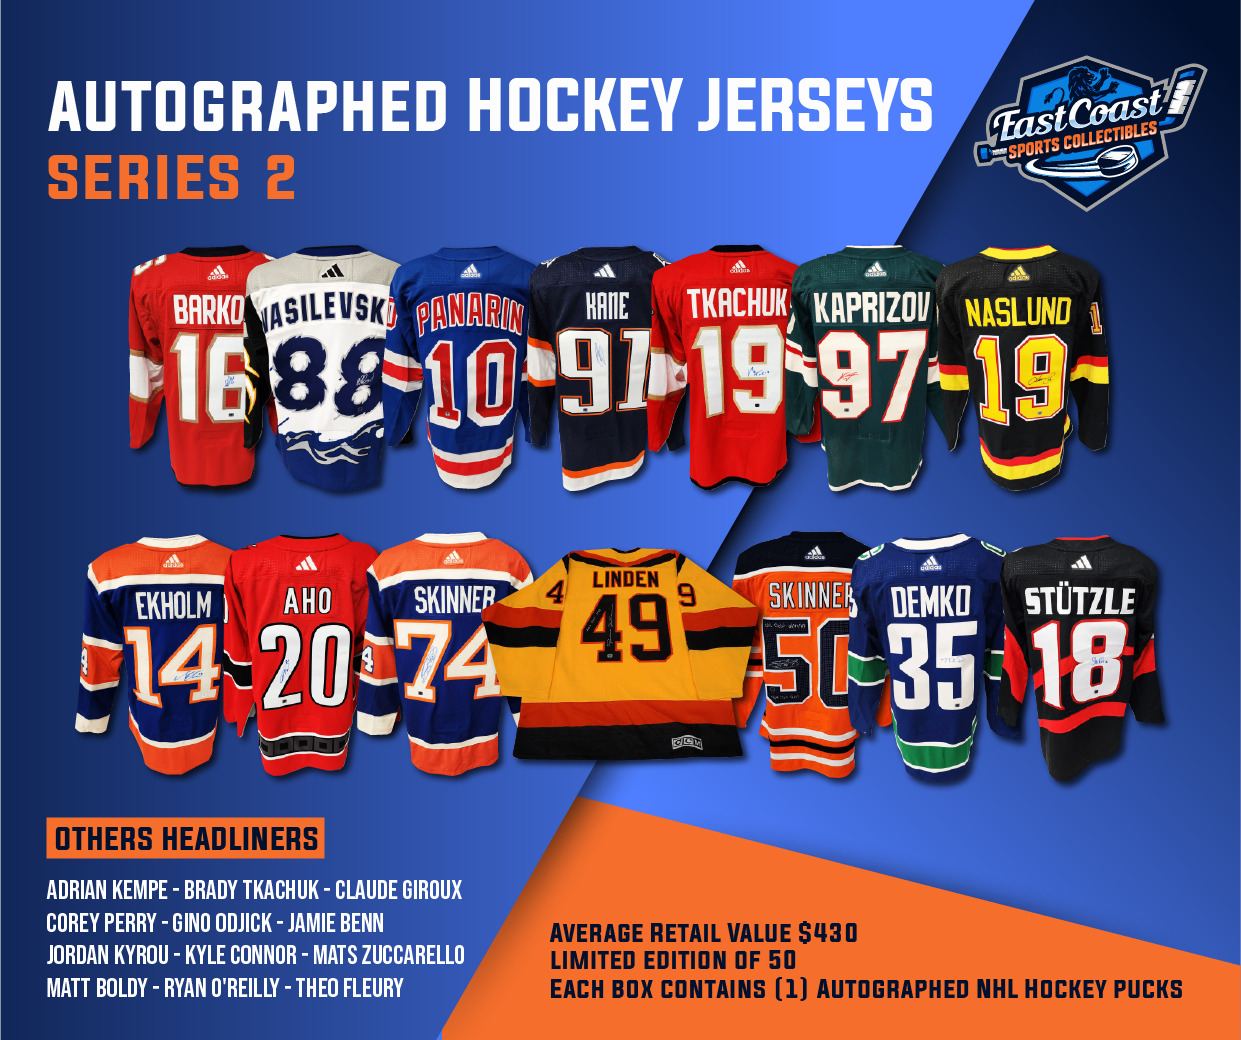 East Coast Sports Collectibles Series 2 Autographed Hockey Jersey Box